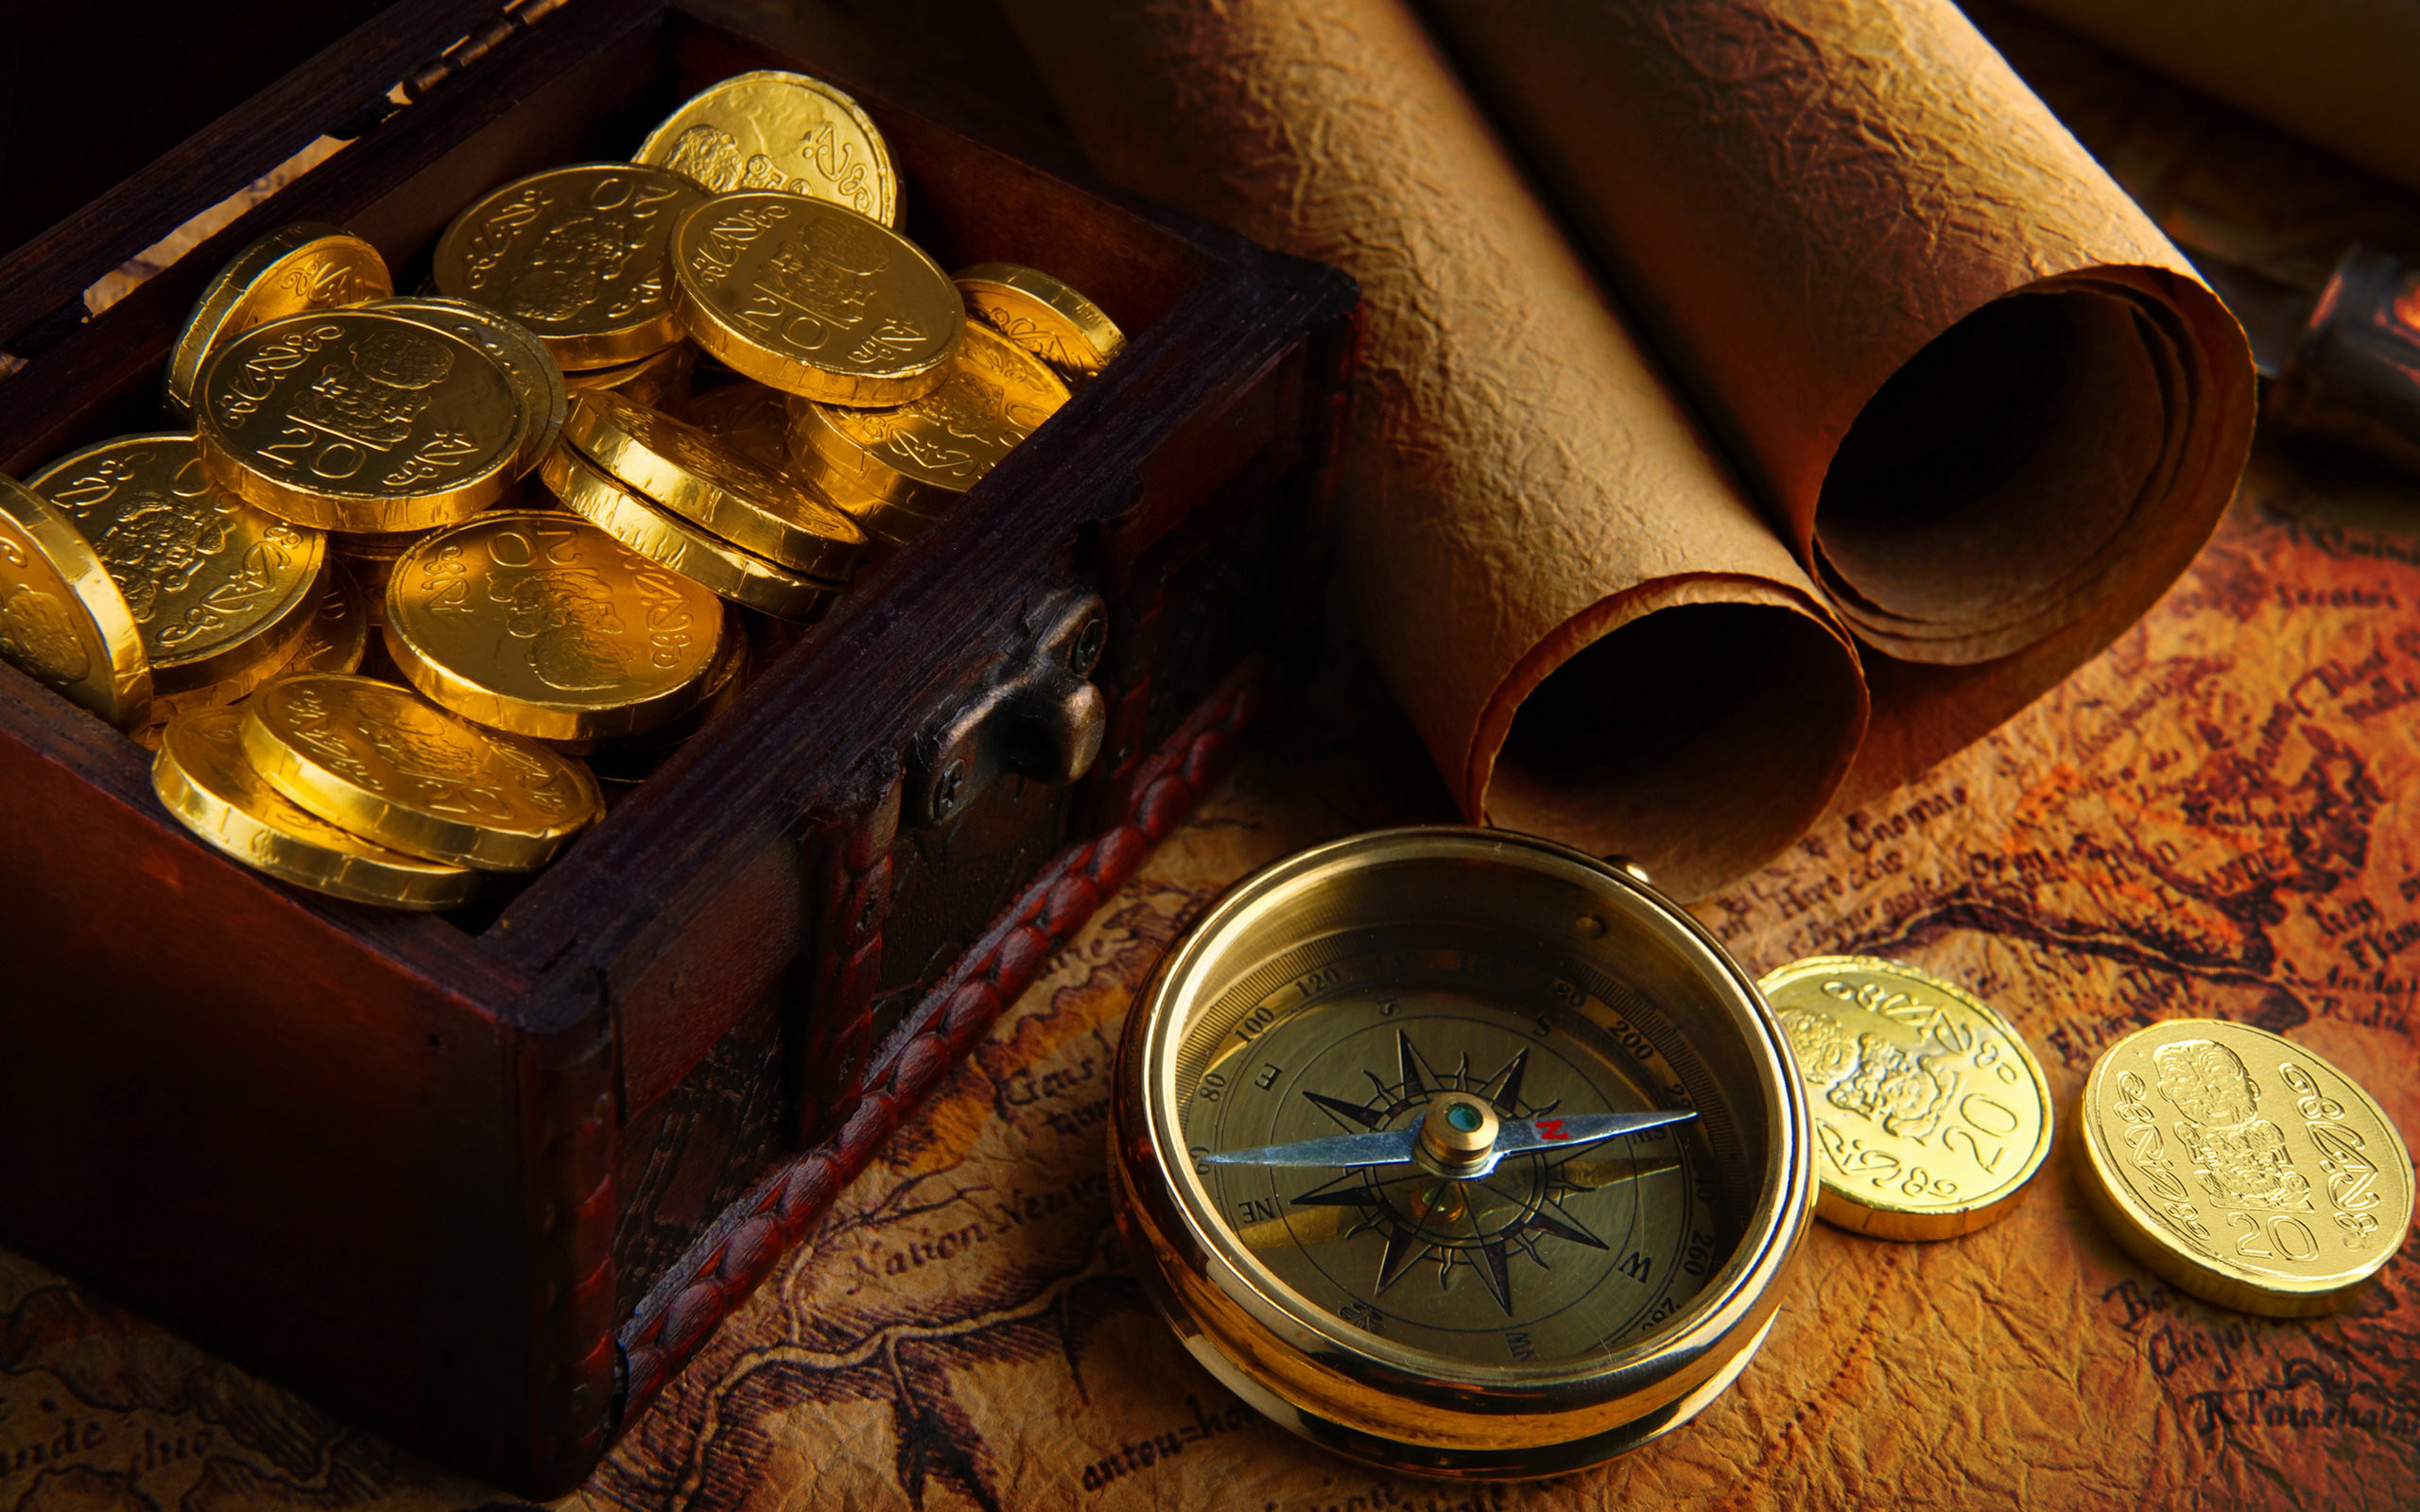 2560x1600 Treasure map and treasure of gold coins wallpapers and images .